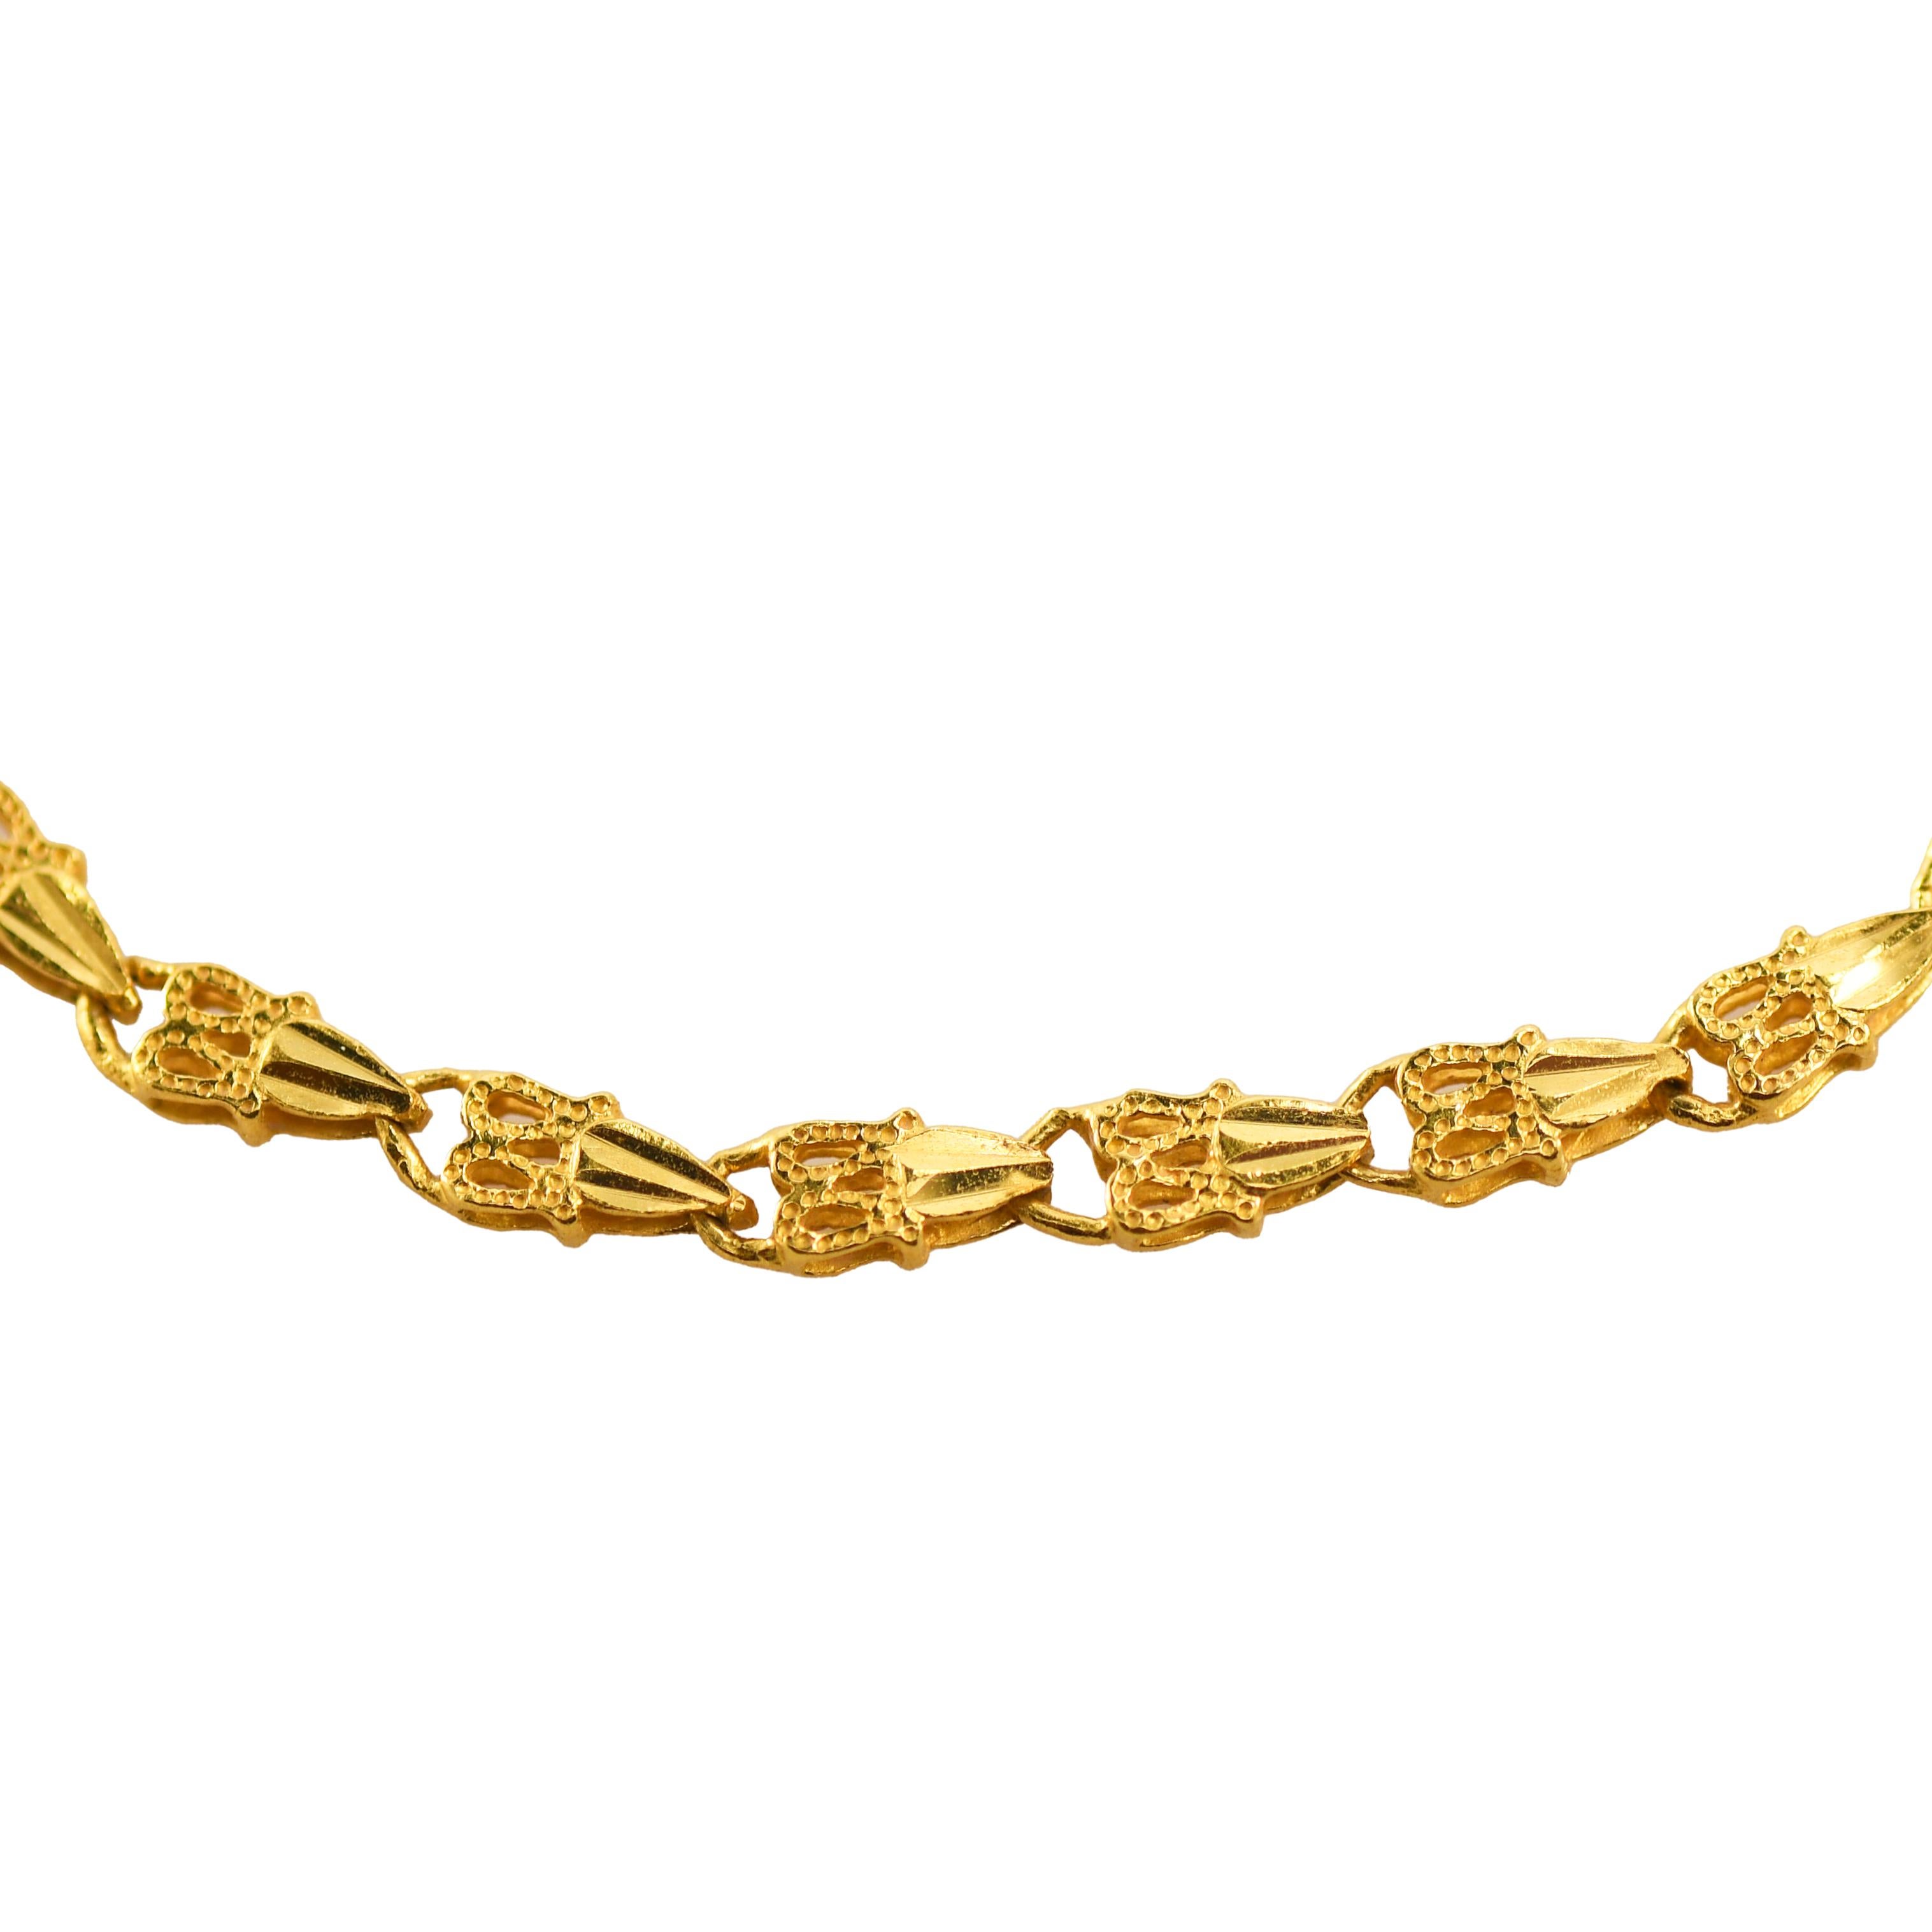 24K Yellow Gold Fancy Link Bracelet 5.6g In Excellent Condition For Sale In Laguna Beach, CA